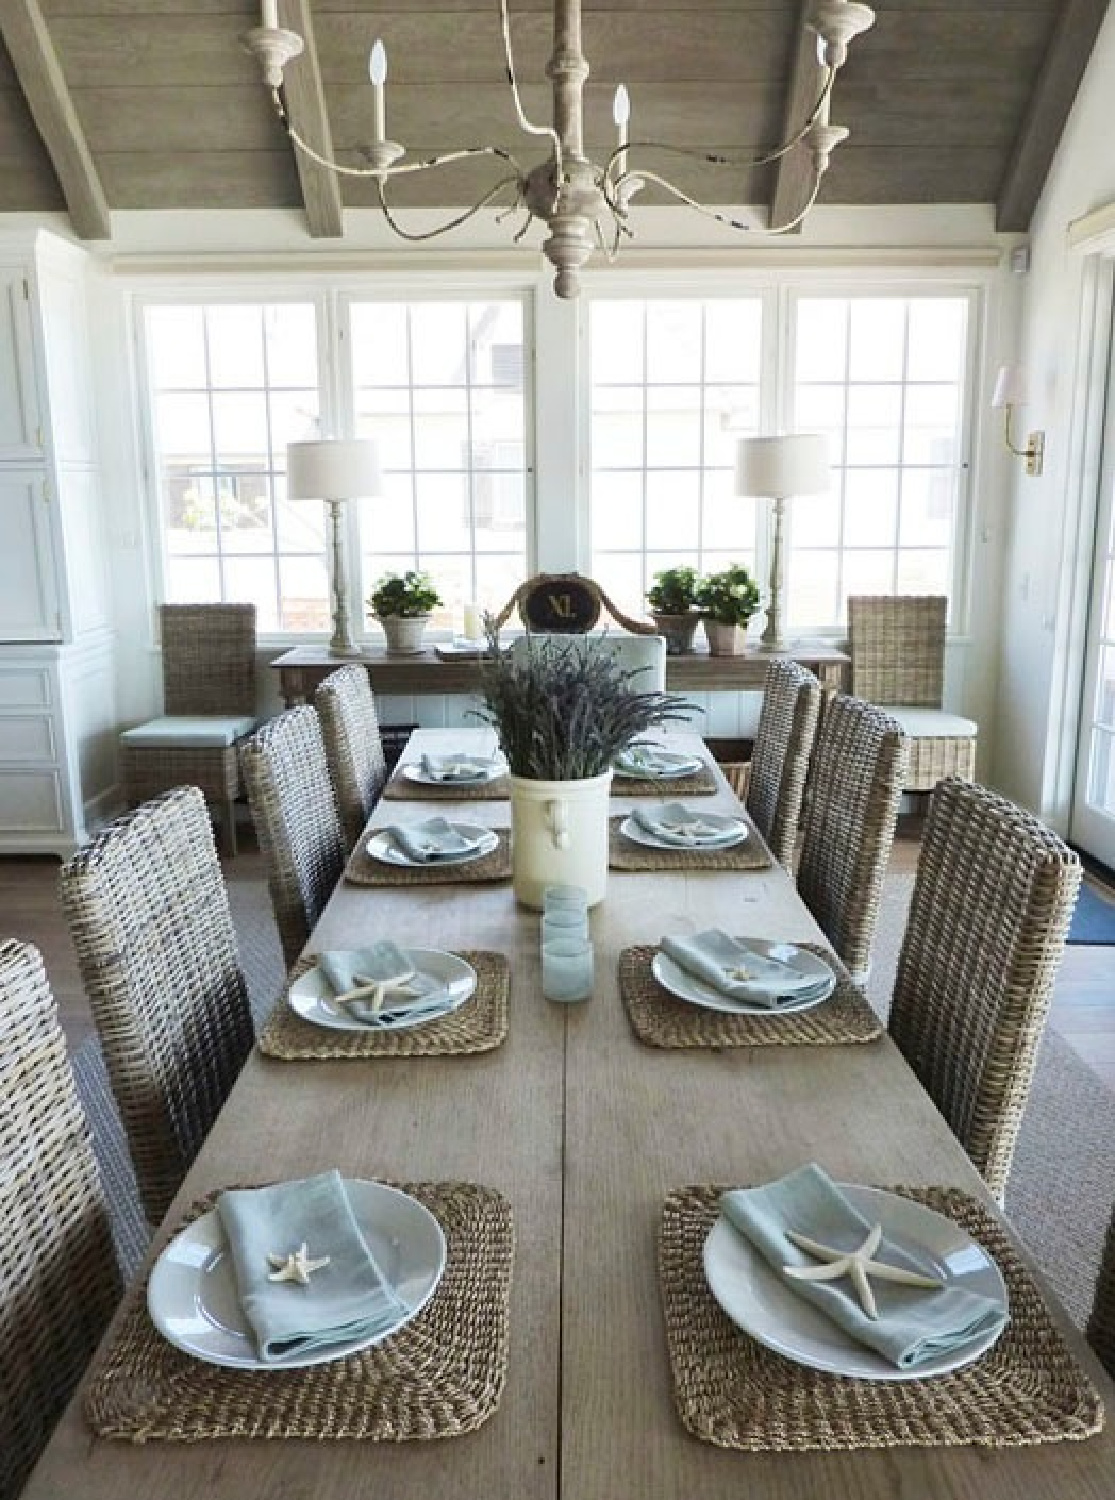 Rattan dining chairs at farmhouse table in a kitchen by Giannetti Home. See more rustic elegant French farmhouse design ideas and decor inspiration. #frenchfarmhouse #interiordesign #frenchcountry